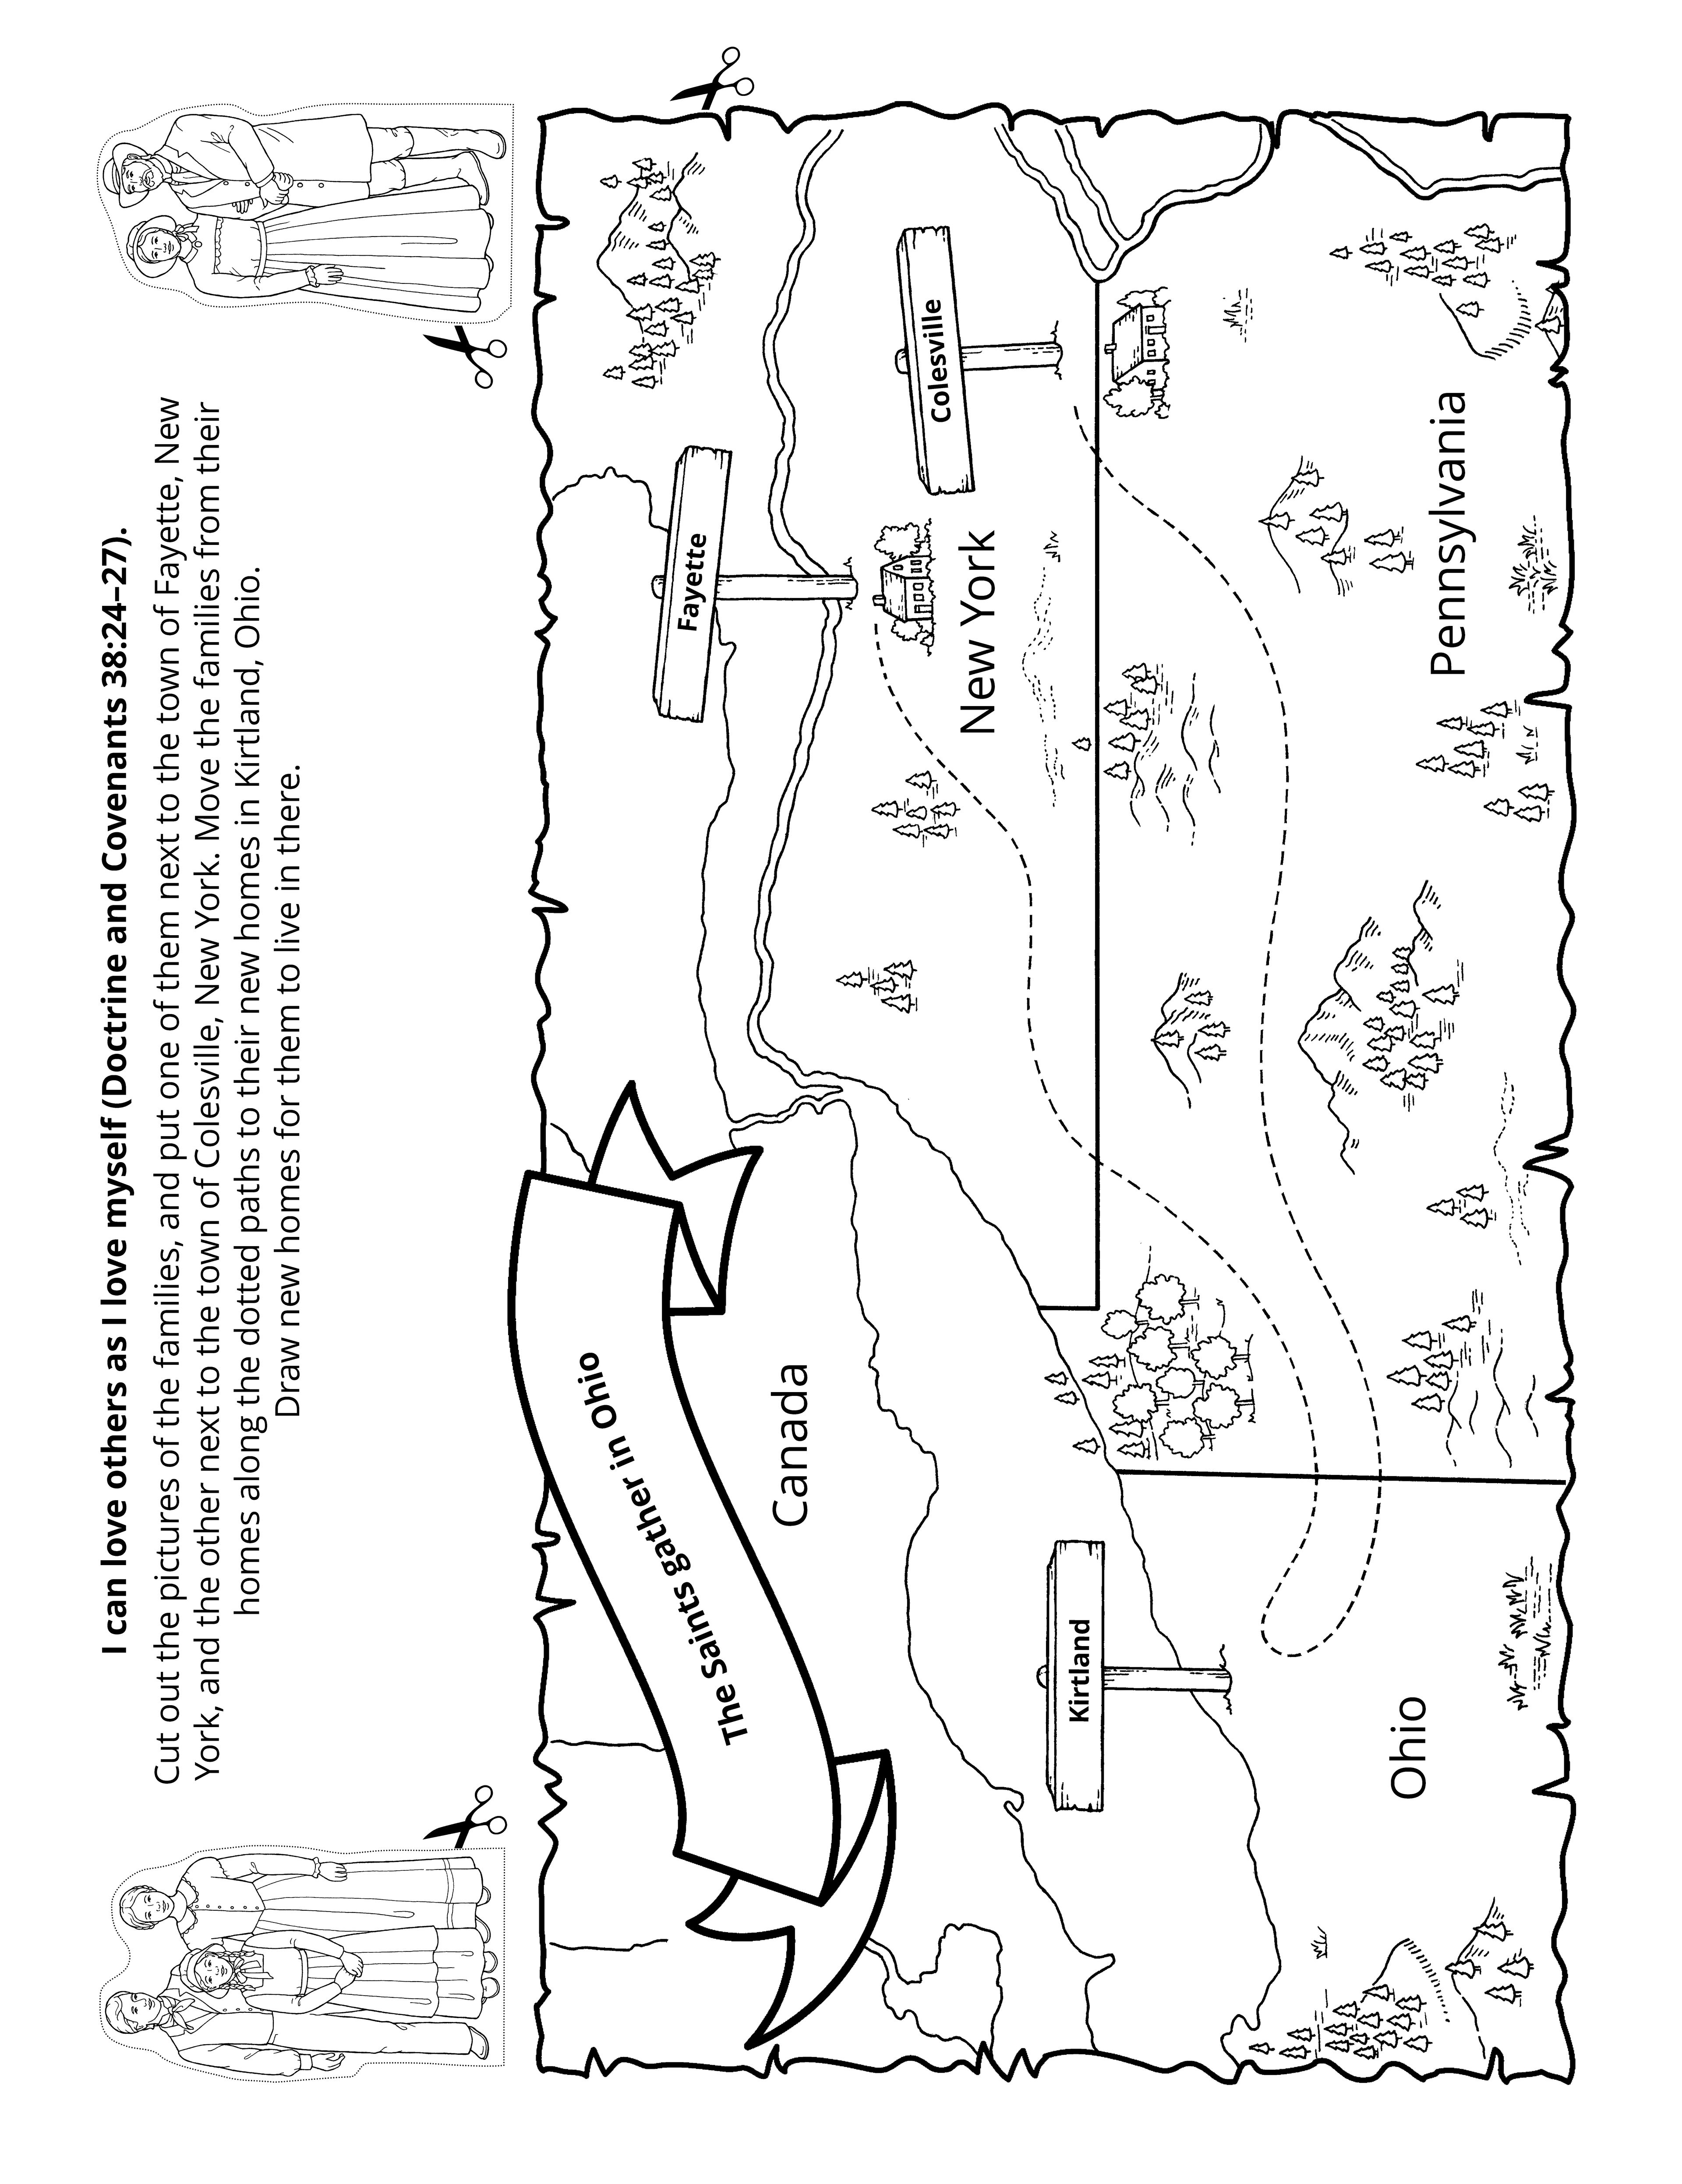 A line art illustration of the route Joseph Smith to Kirtland from New York